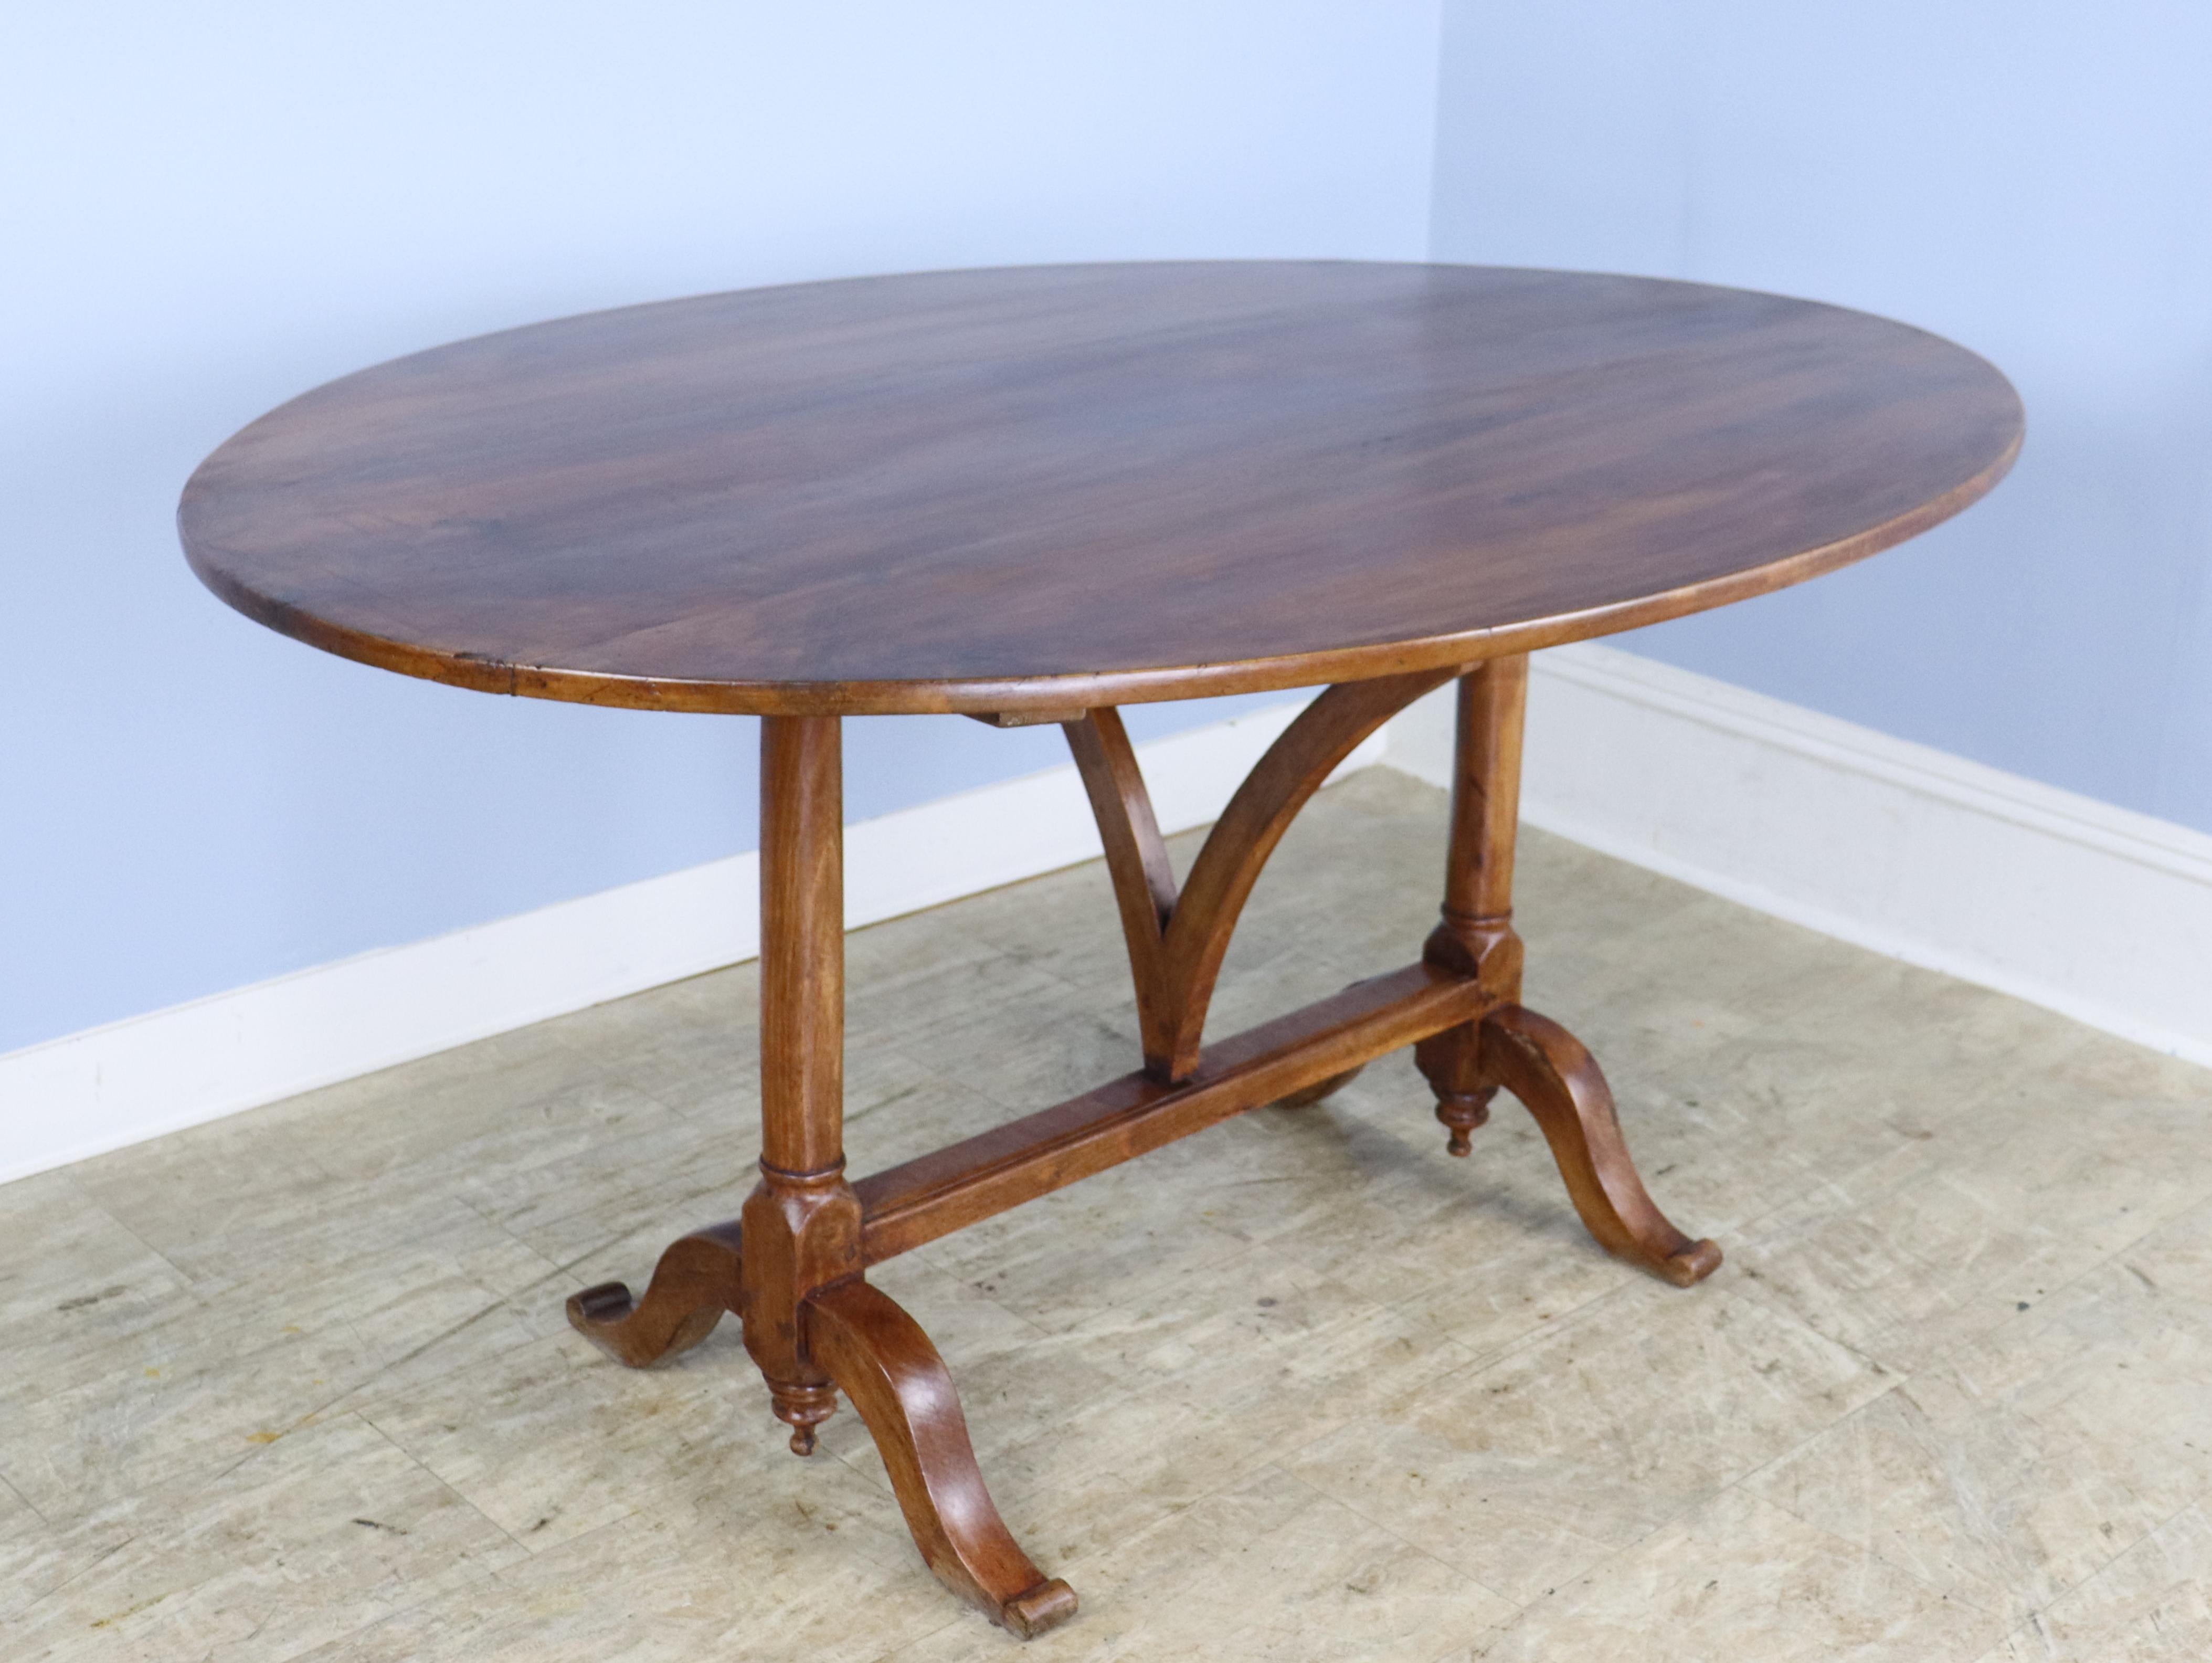 One of the finest wine tasting tables we have had in the store.  With a width of 57 inches, this lovely oval table will provide good seating for a group, and has the advantage of not having an apron to get in the way of knees or chairs. The vendange